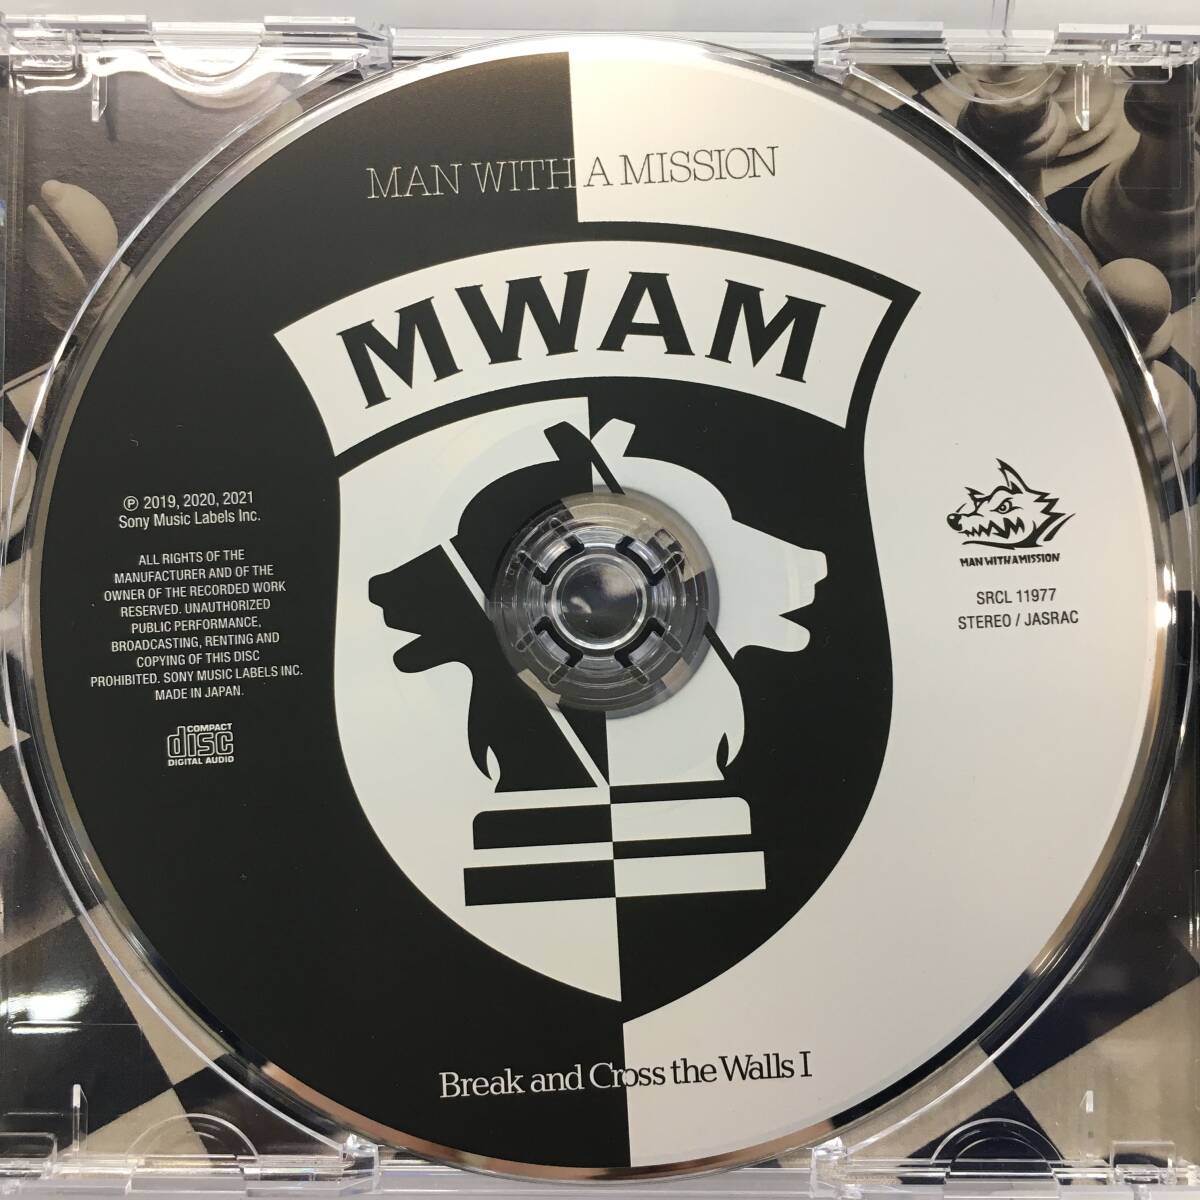 C5211 ★1円～【CD セット】 MAN WITH A MISSION Break and Cross the Walls Ⅰ・Ⅱ 中古品 ◎コンパクト発送◎の画像7